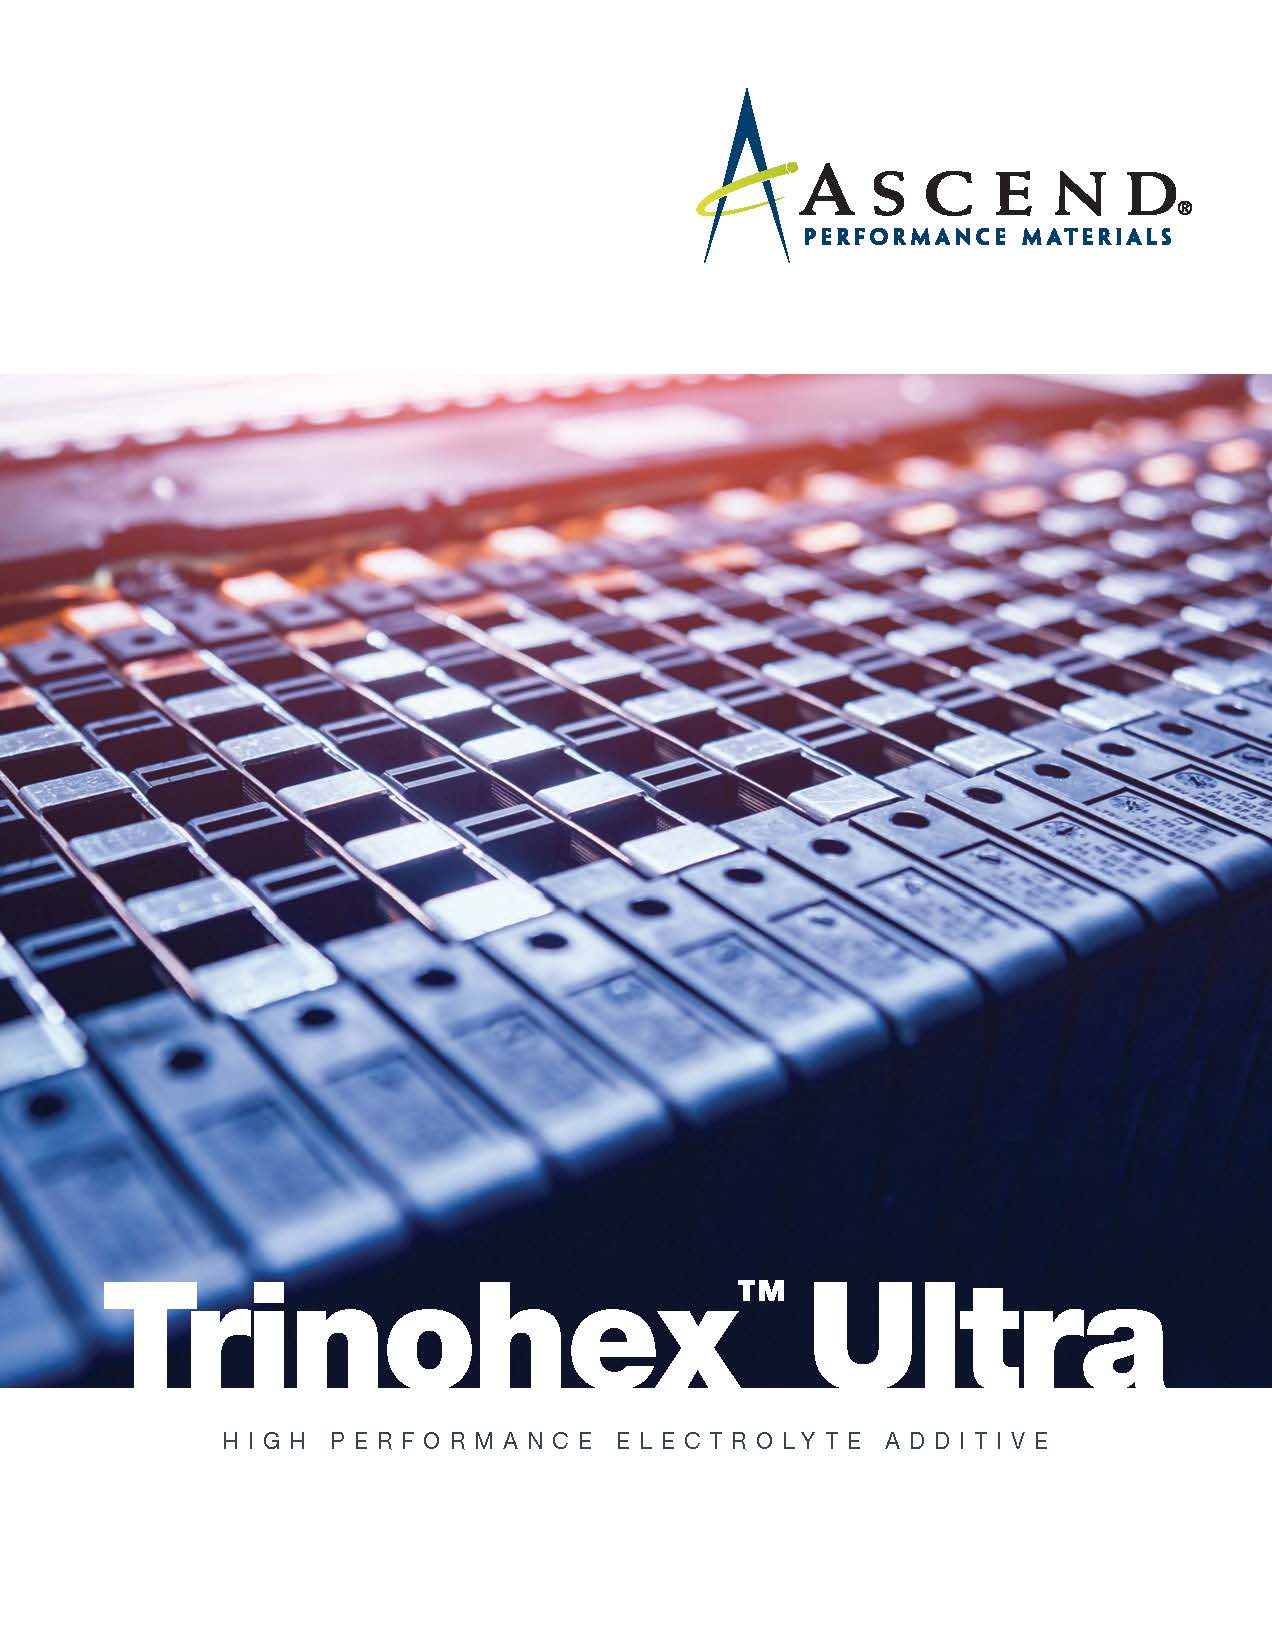 Better battery performance with Trinohex Ultra